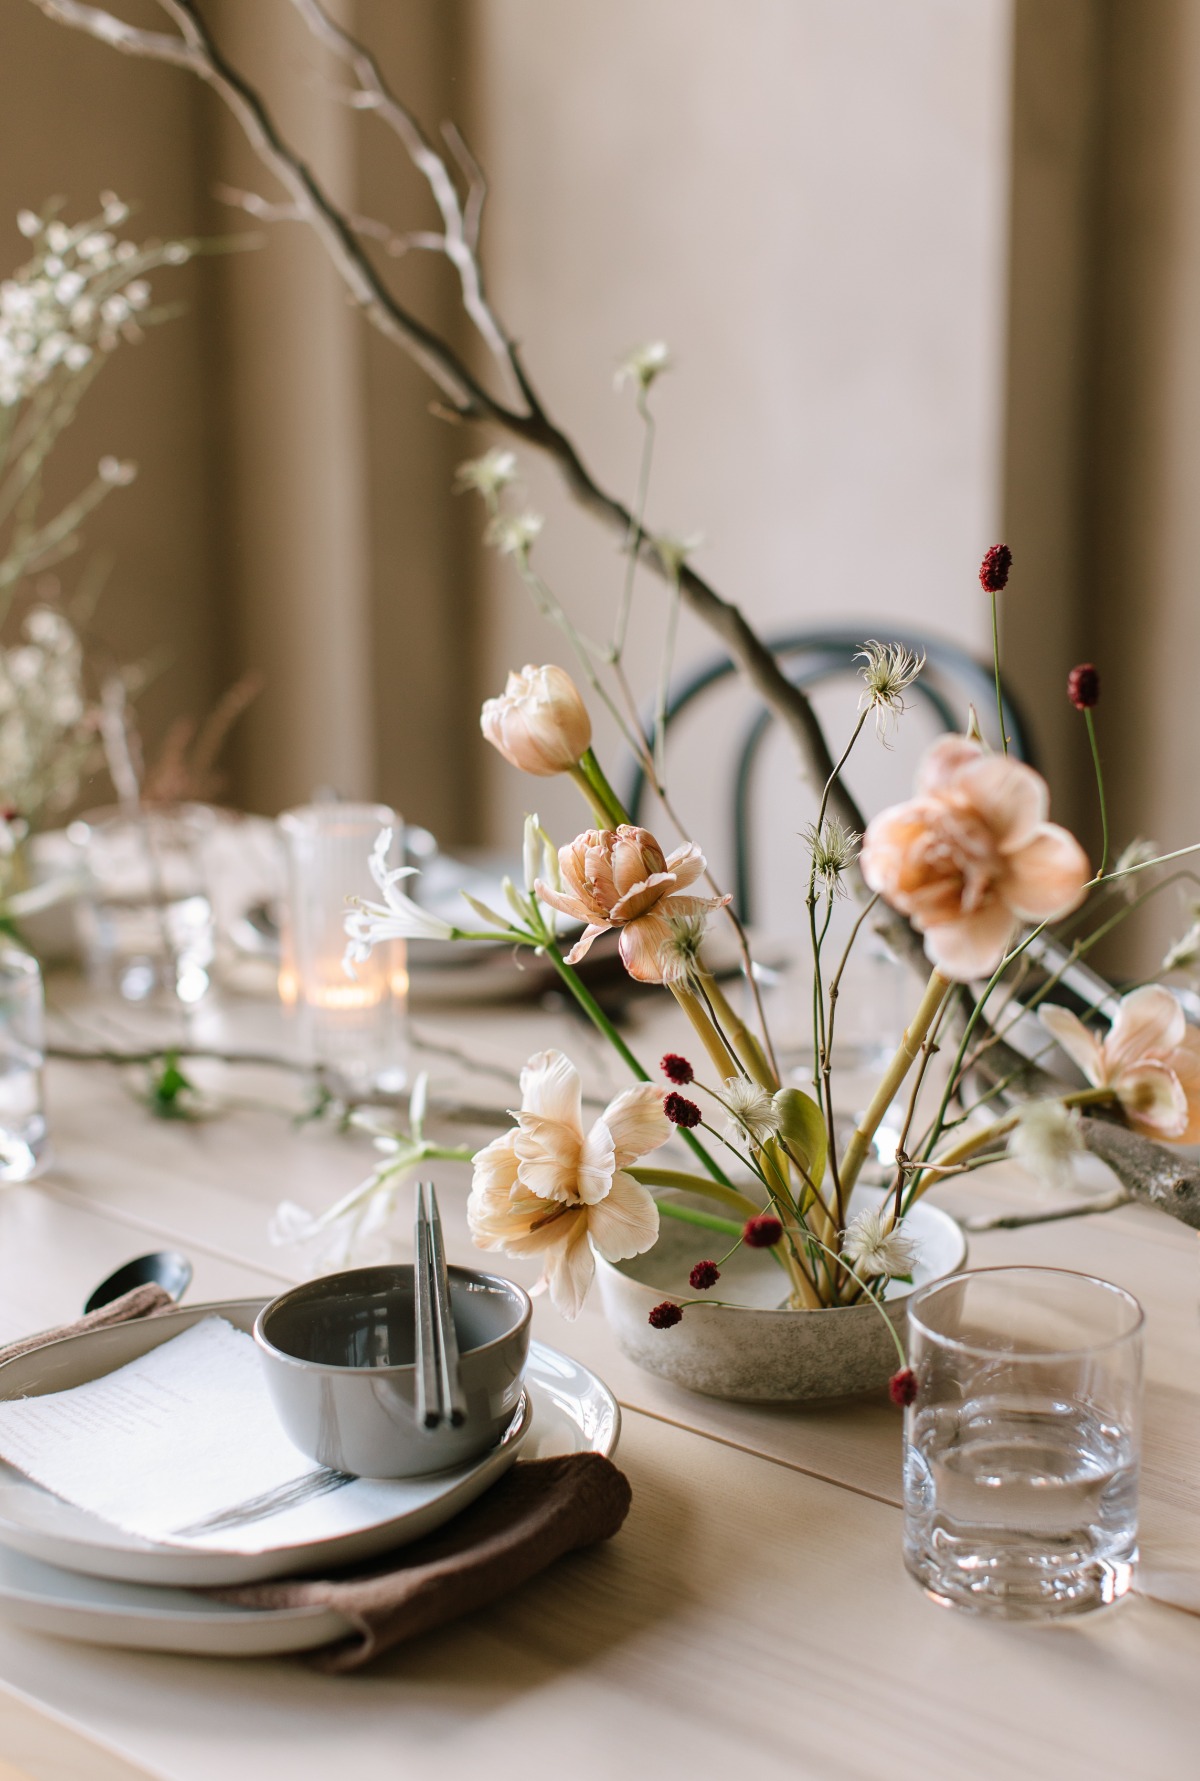 Whimsical Japanese centerpiece for wedding reception table